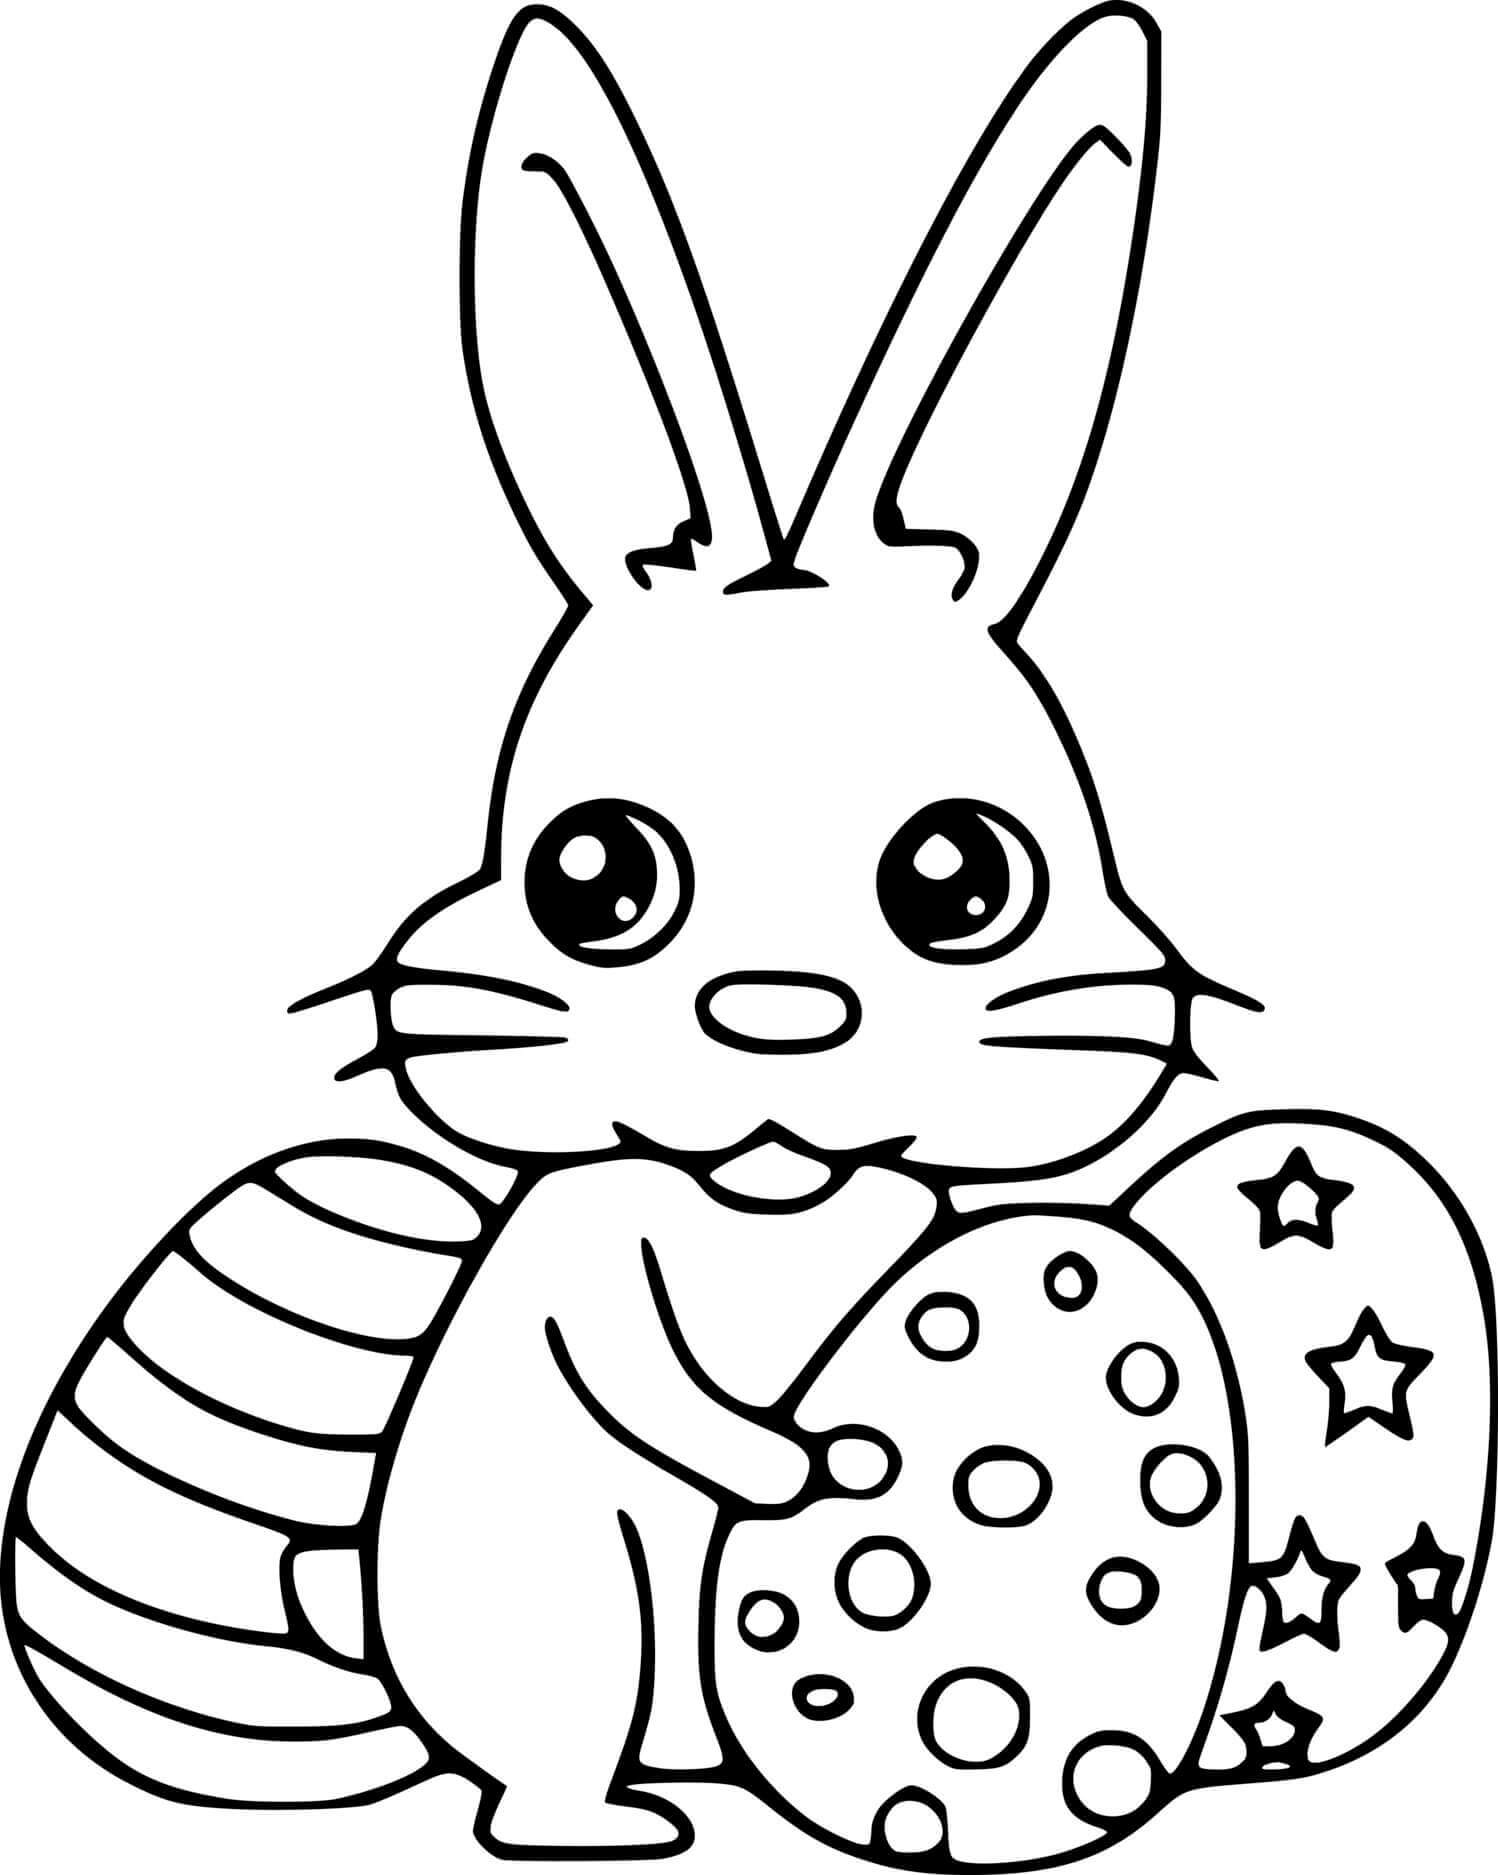 Cute Easter Bunny And Three Eggs Coloring Page